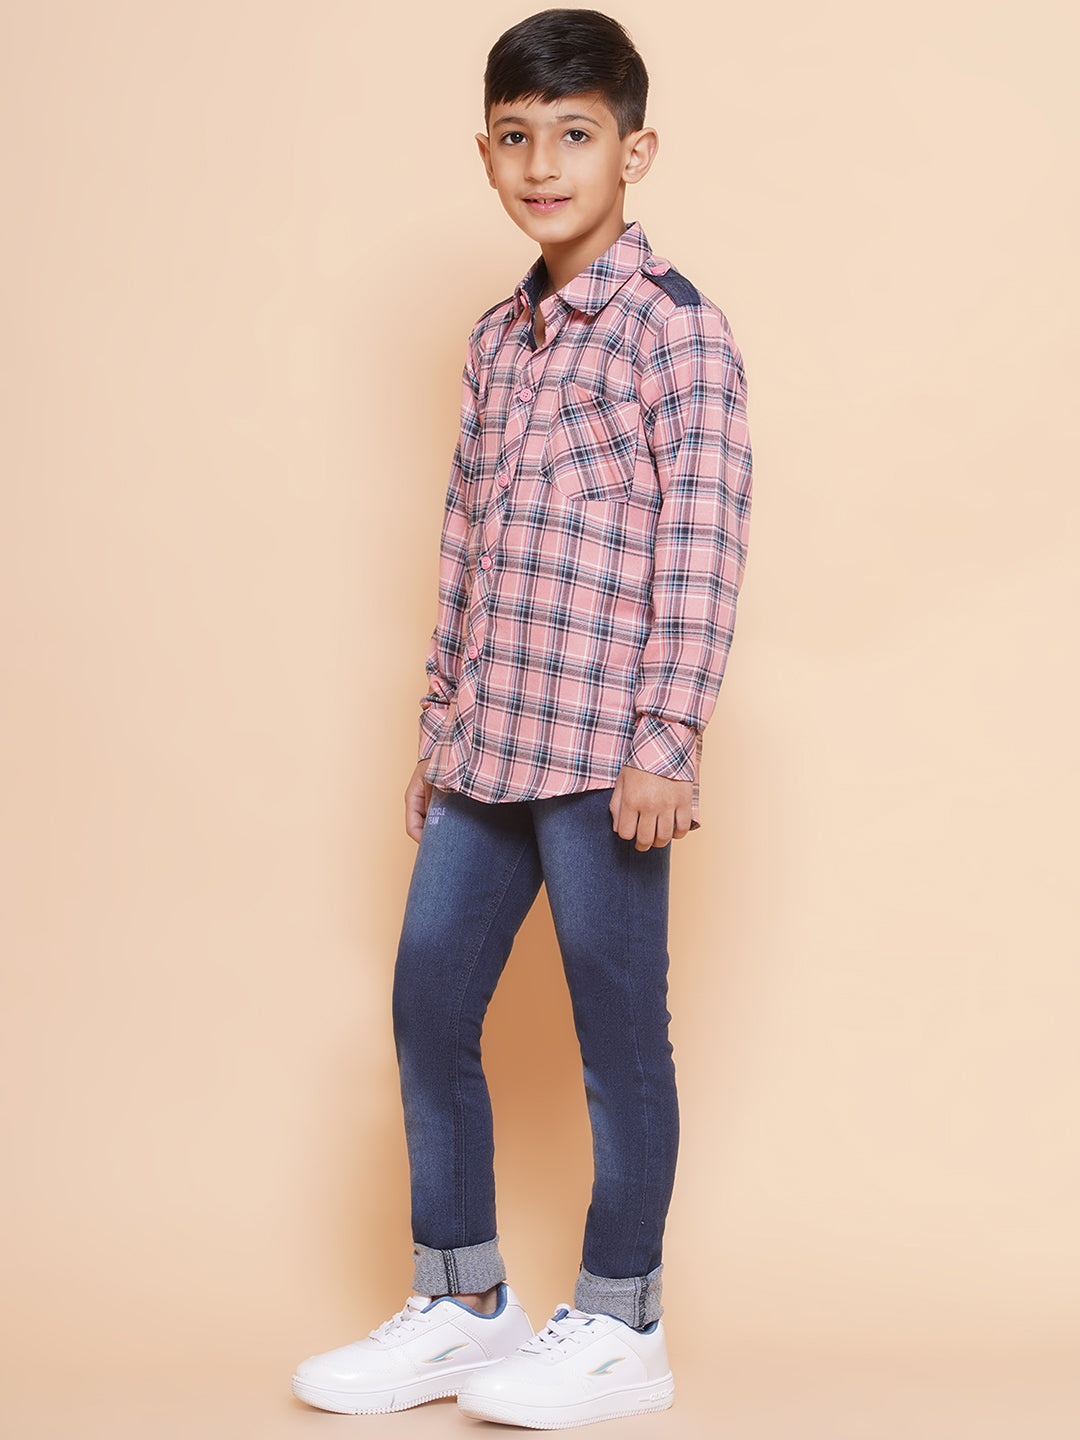 Kids Pink Shirt and Jeans Clothing Set For Boys